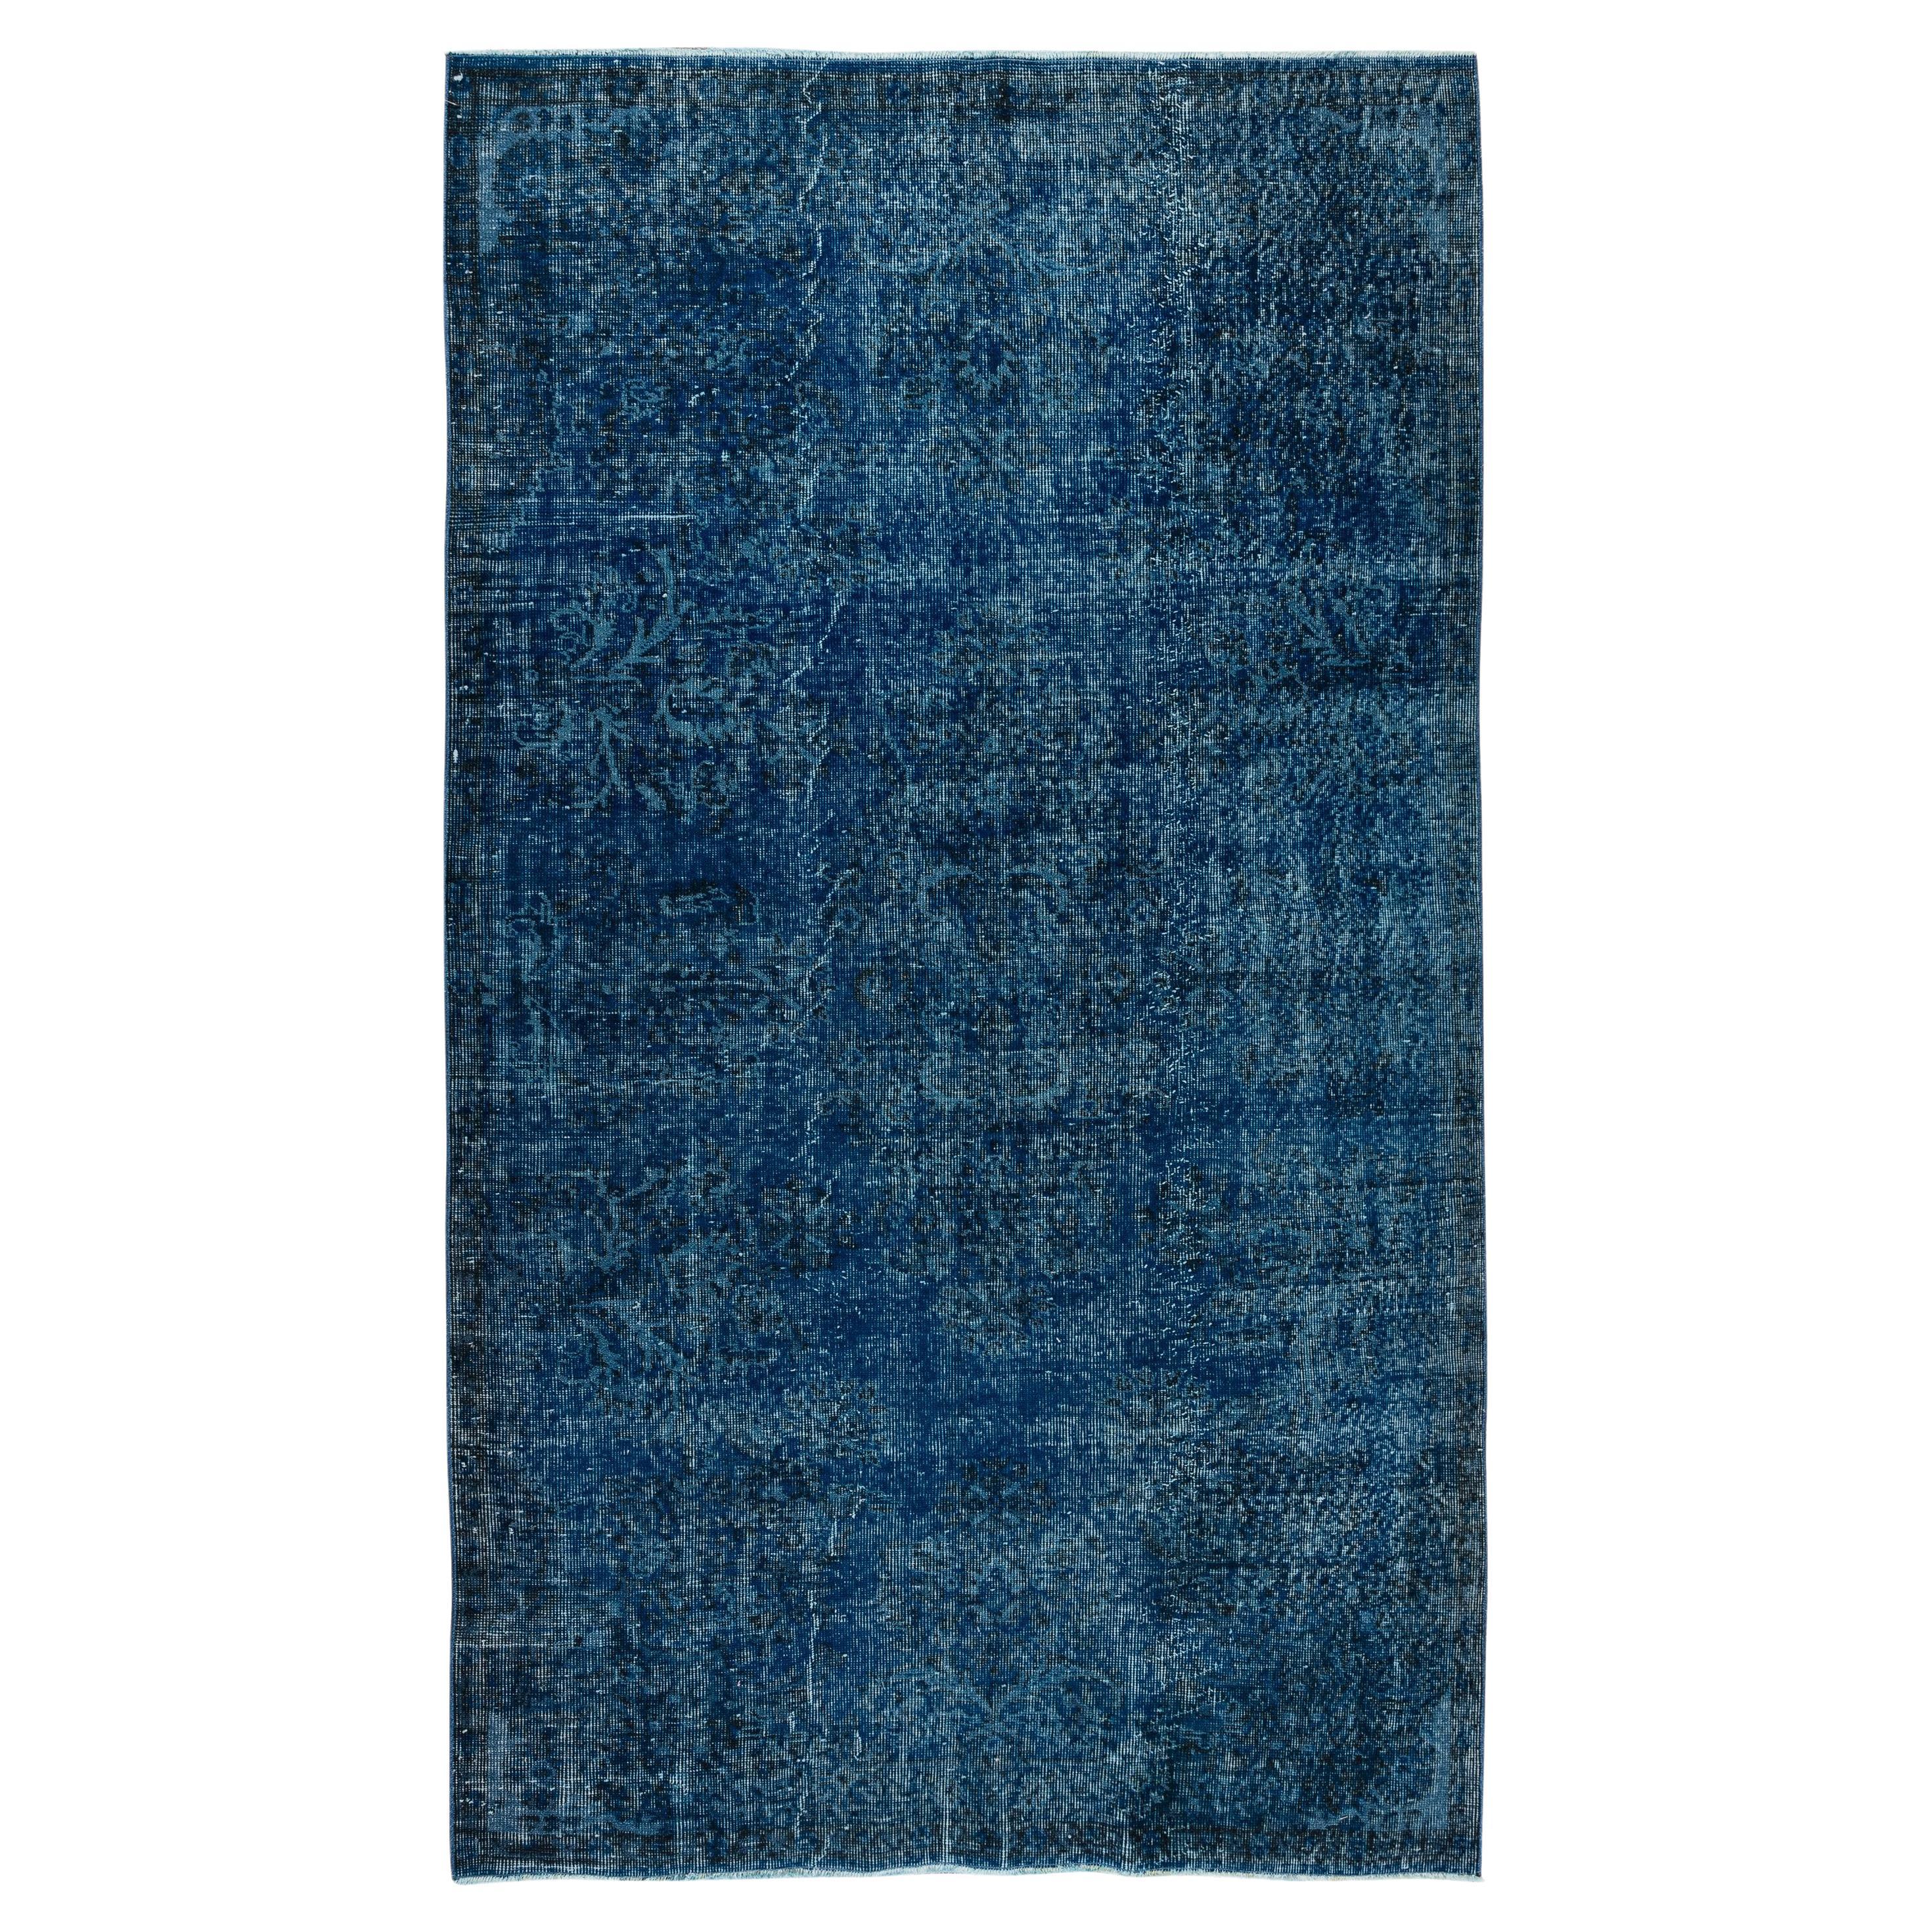 5.2x8.7 Ft Turkish Handmade Vintage Rug Over-Dyed in Navy Blue for Living Room